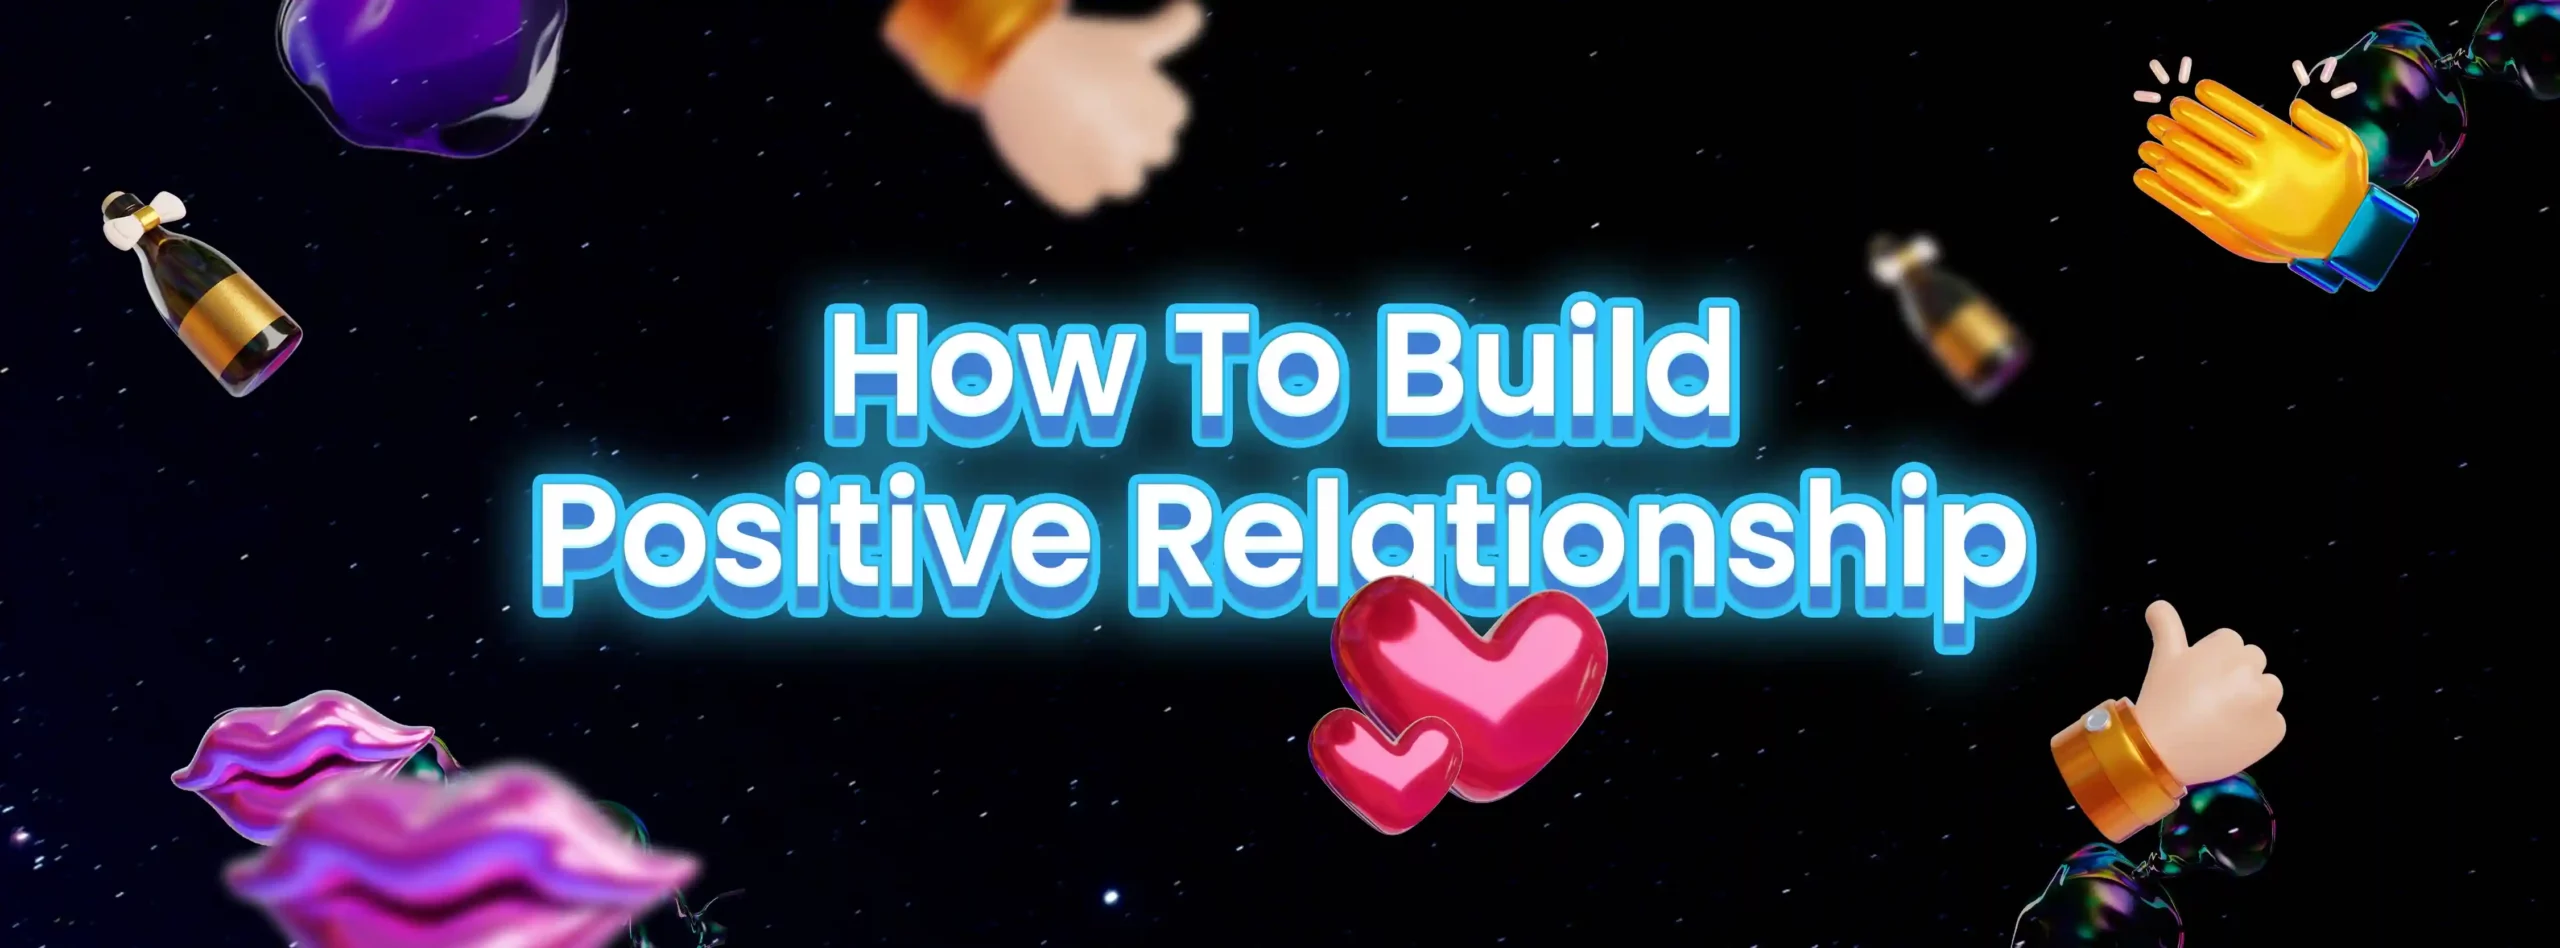 how to build positive relationships